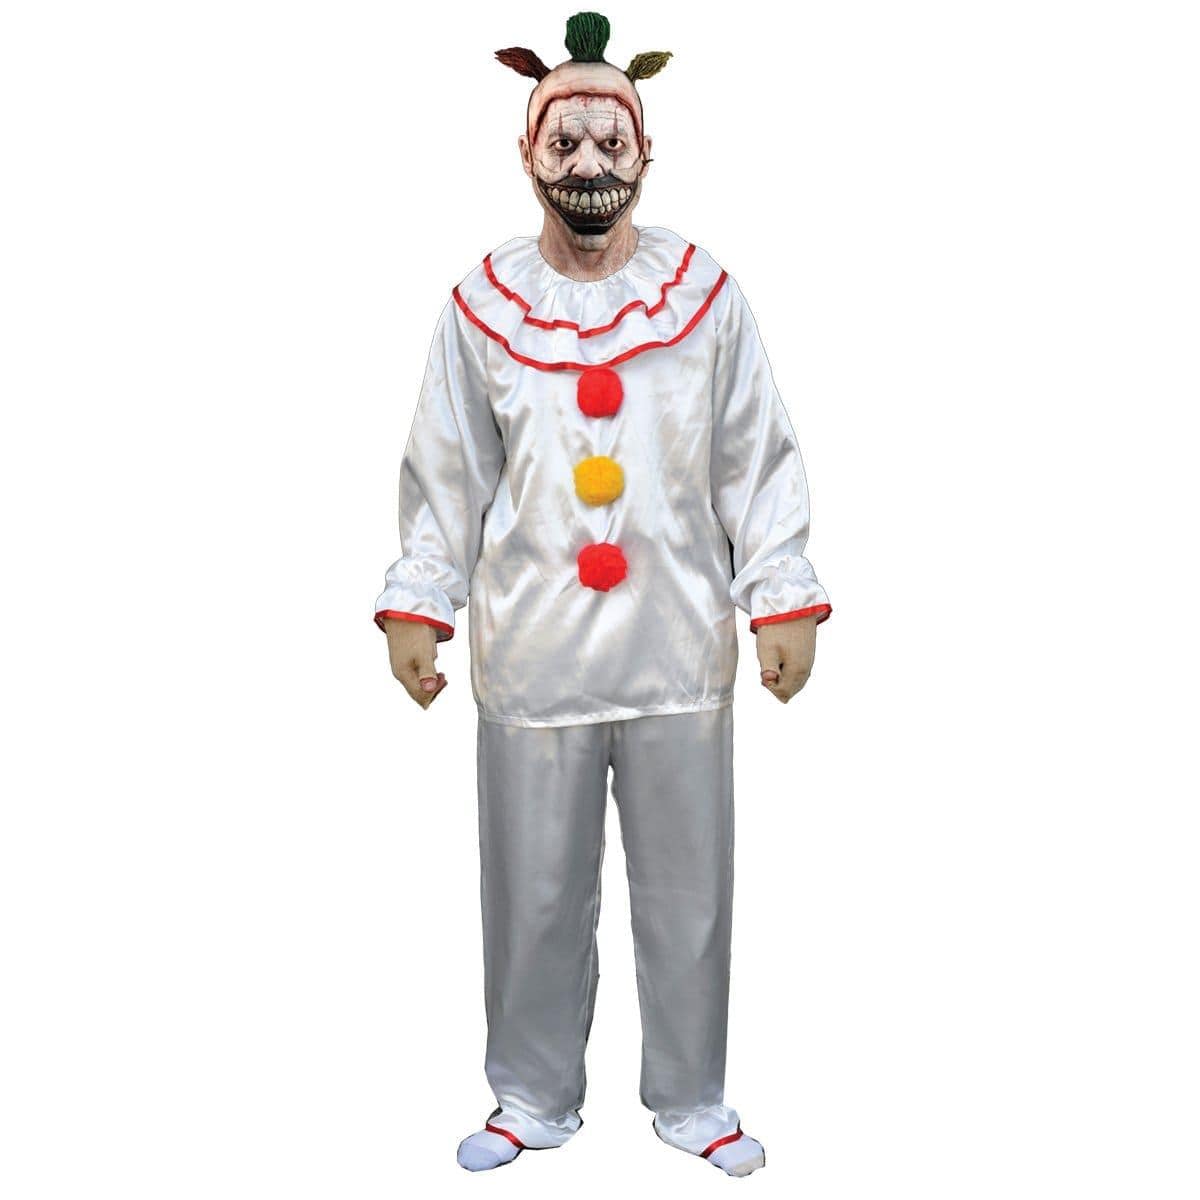 Buy Costumes Twisty the Clown Costume for Adults, American Horror Story sold at Party Expert